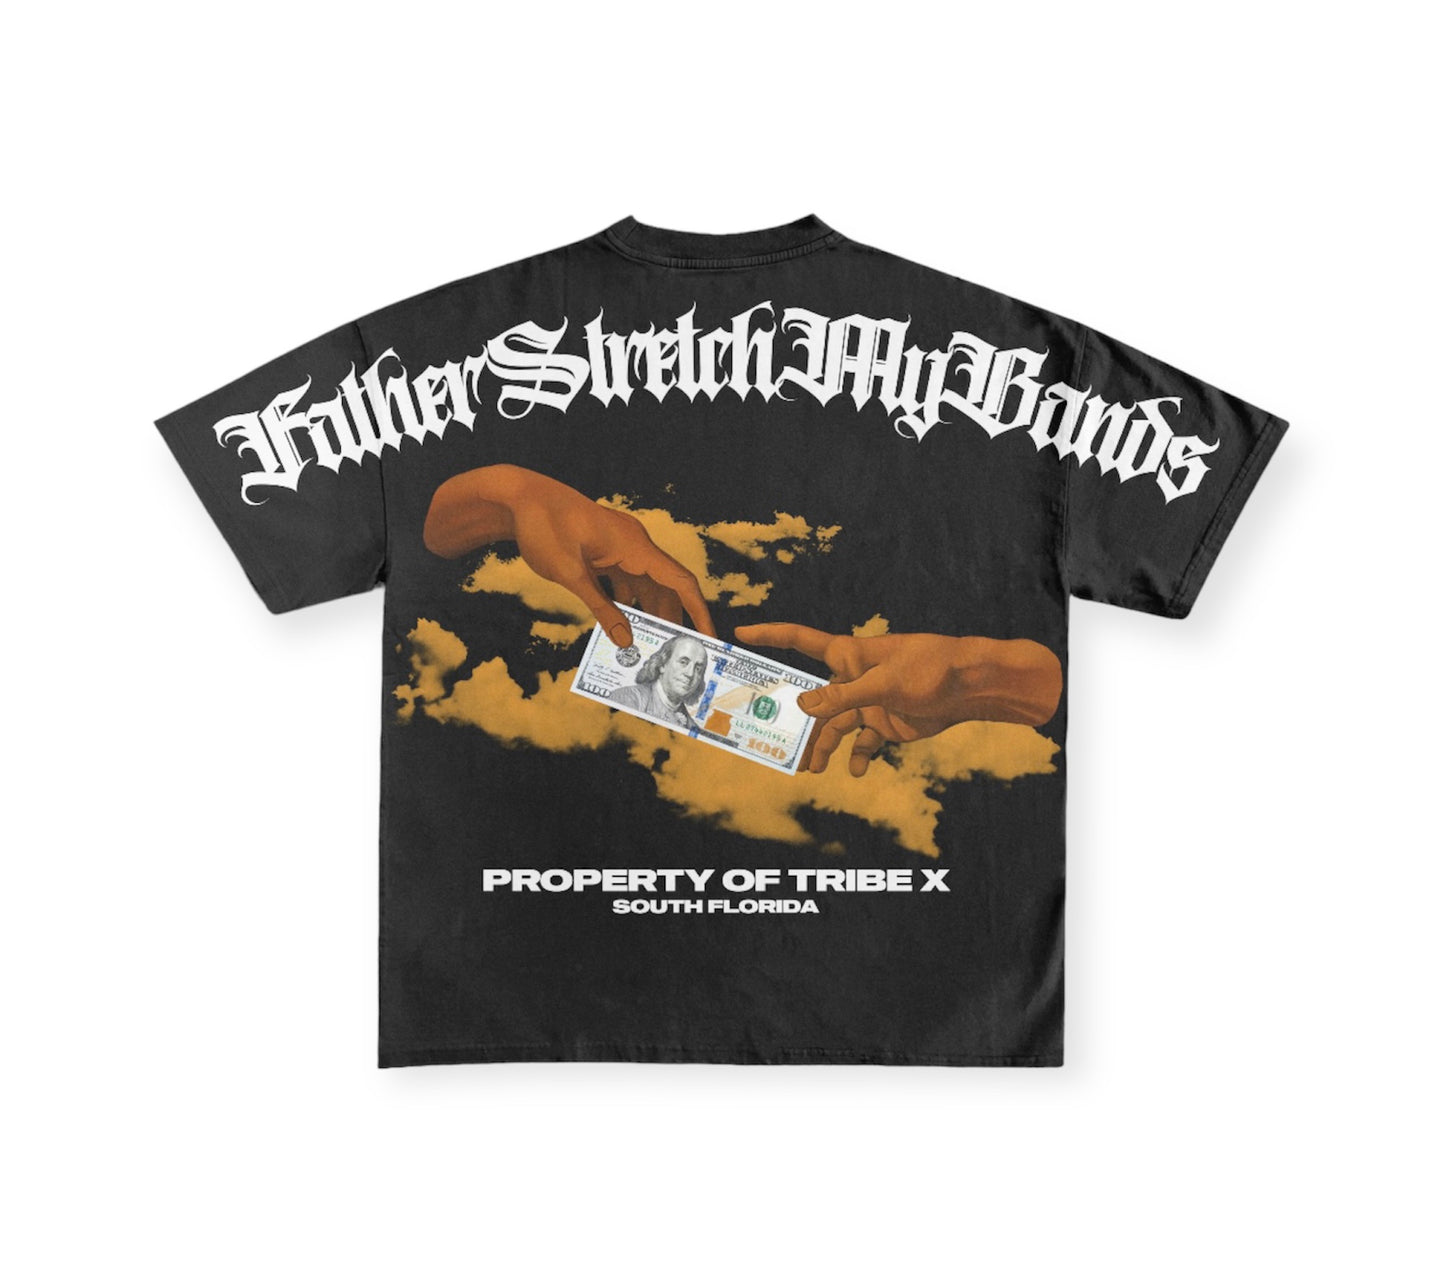 “Father Stretch My Bands” Tee - Acid Wash